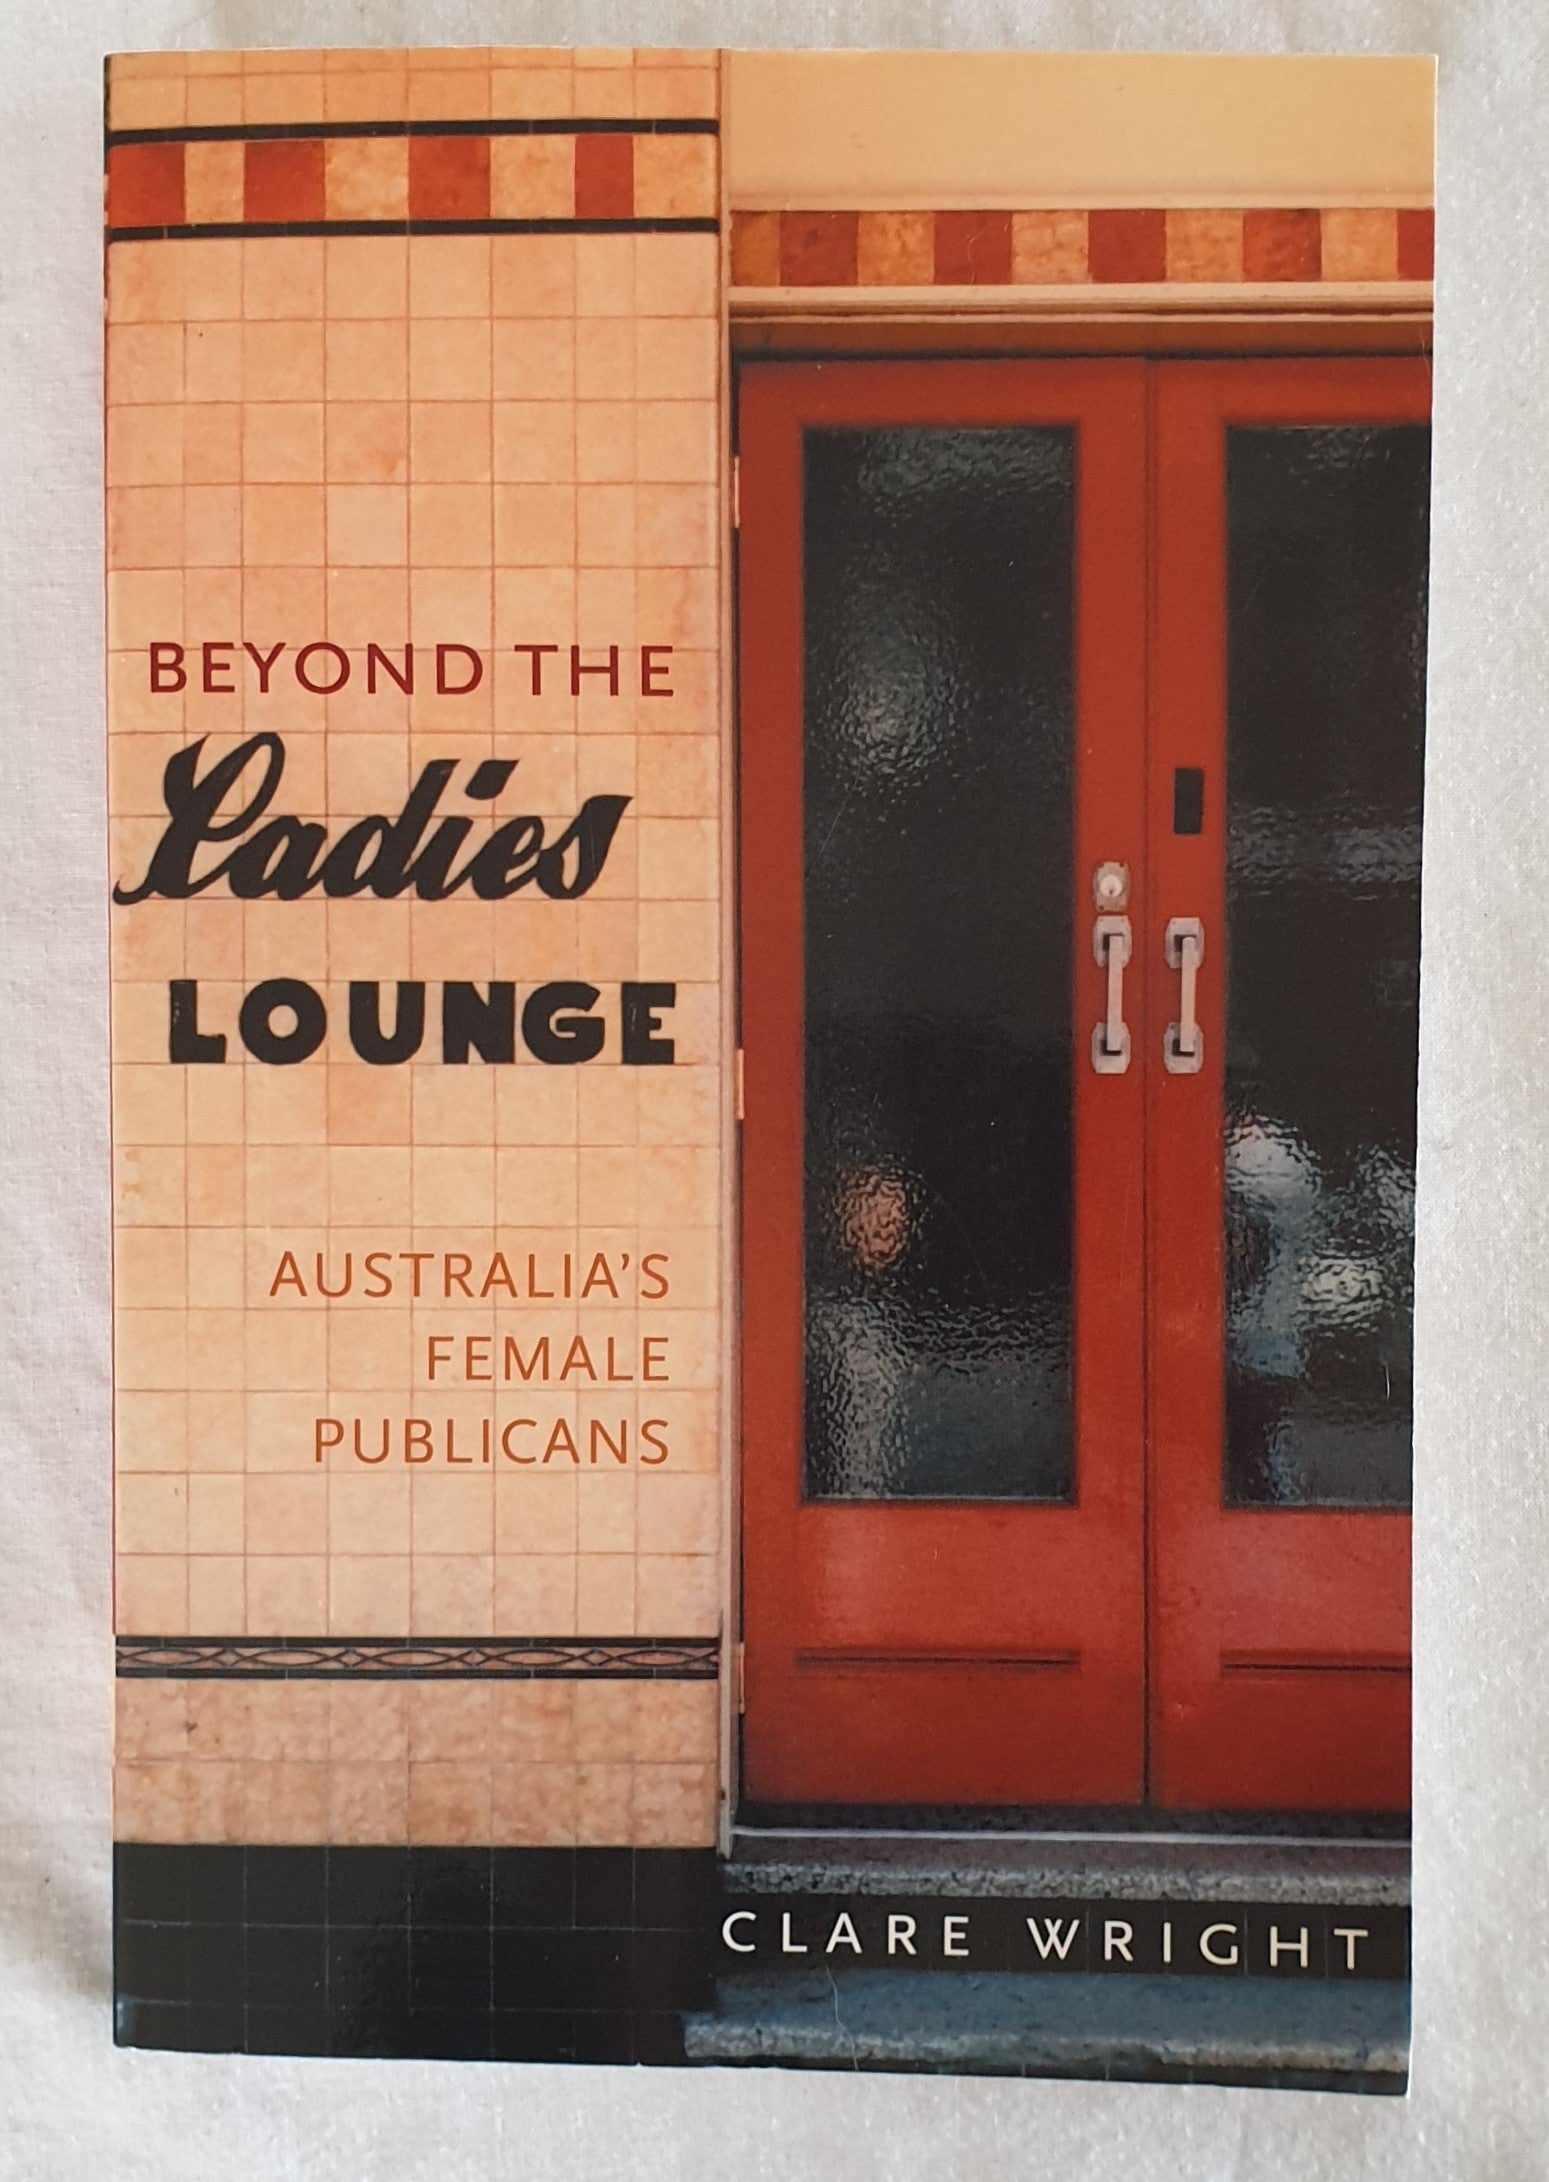 Beyond the Ladies Lounge  Australia's Female Publicans  by Clare Wright